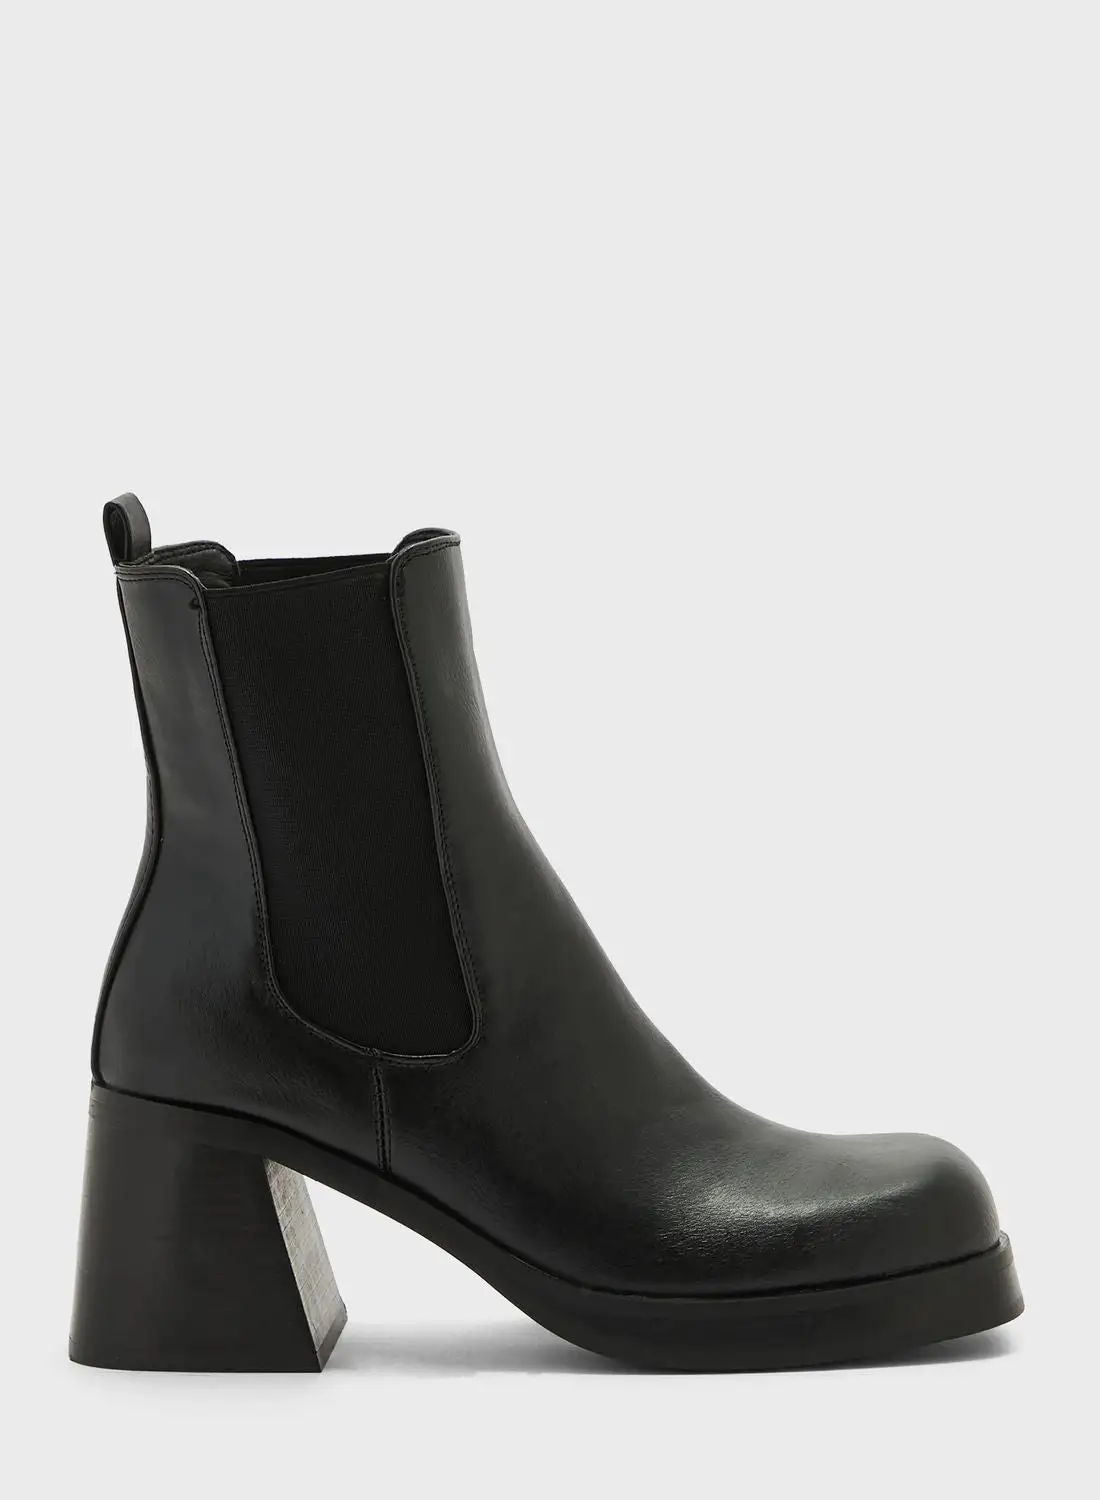 TOPSHOP Bay Ankle Boots